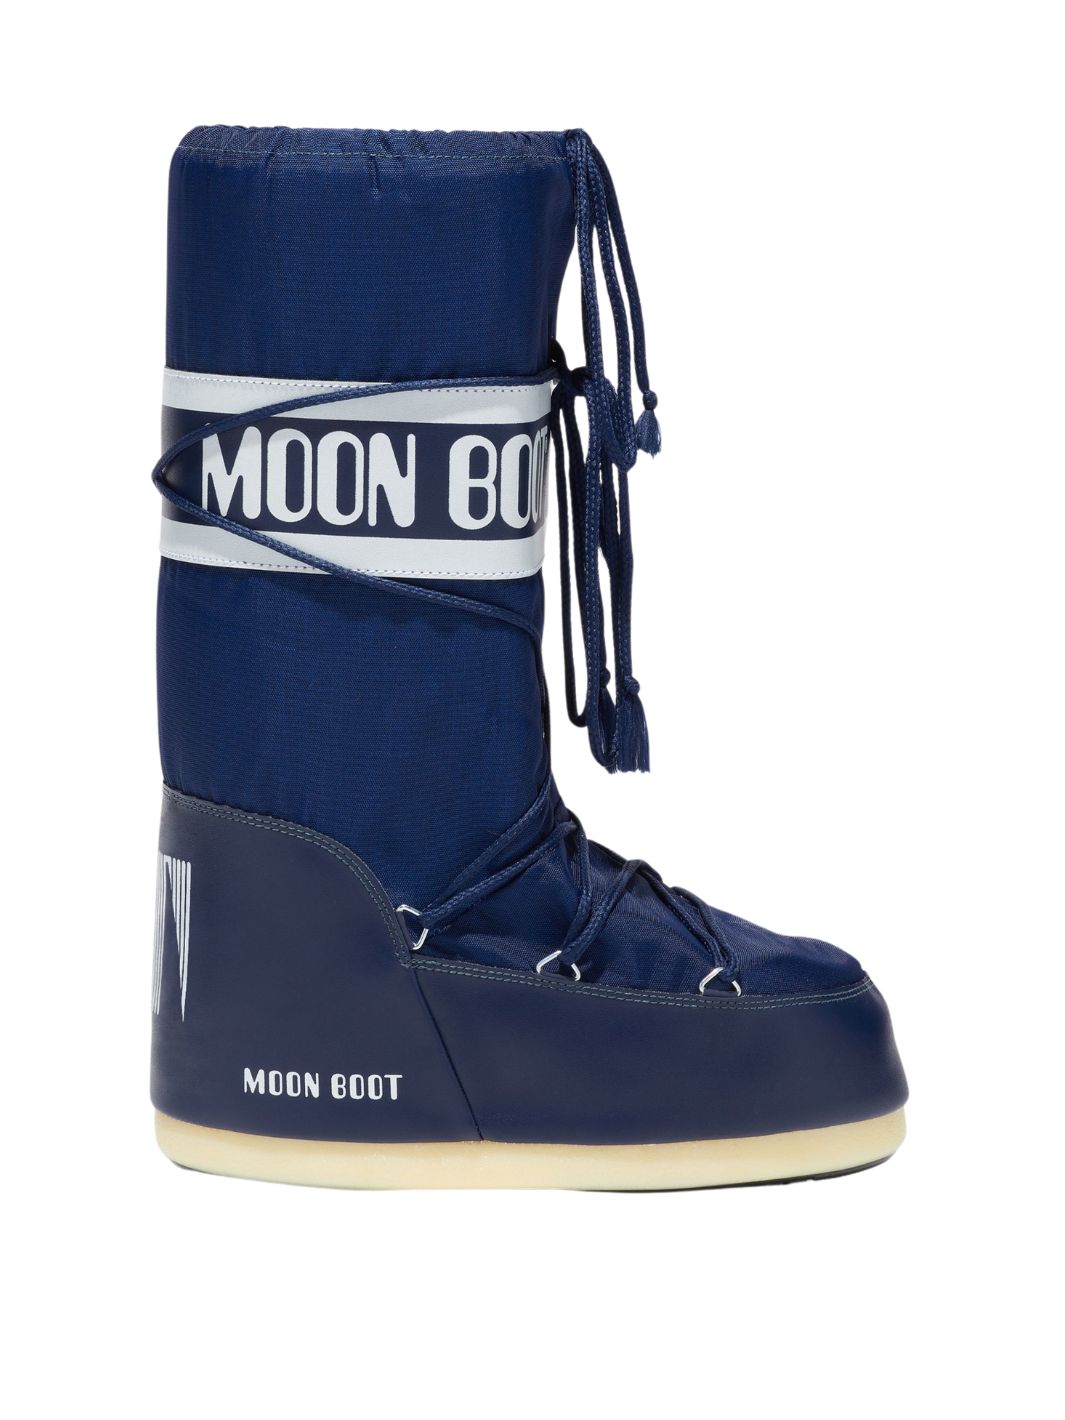 Moon Boot Shoes Boots | MB Icon Nylon Blue